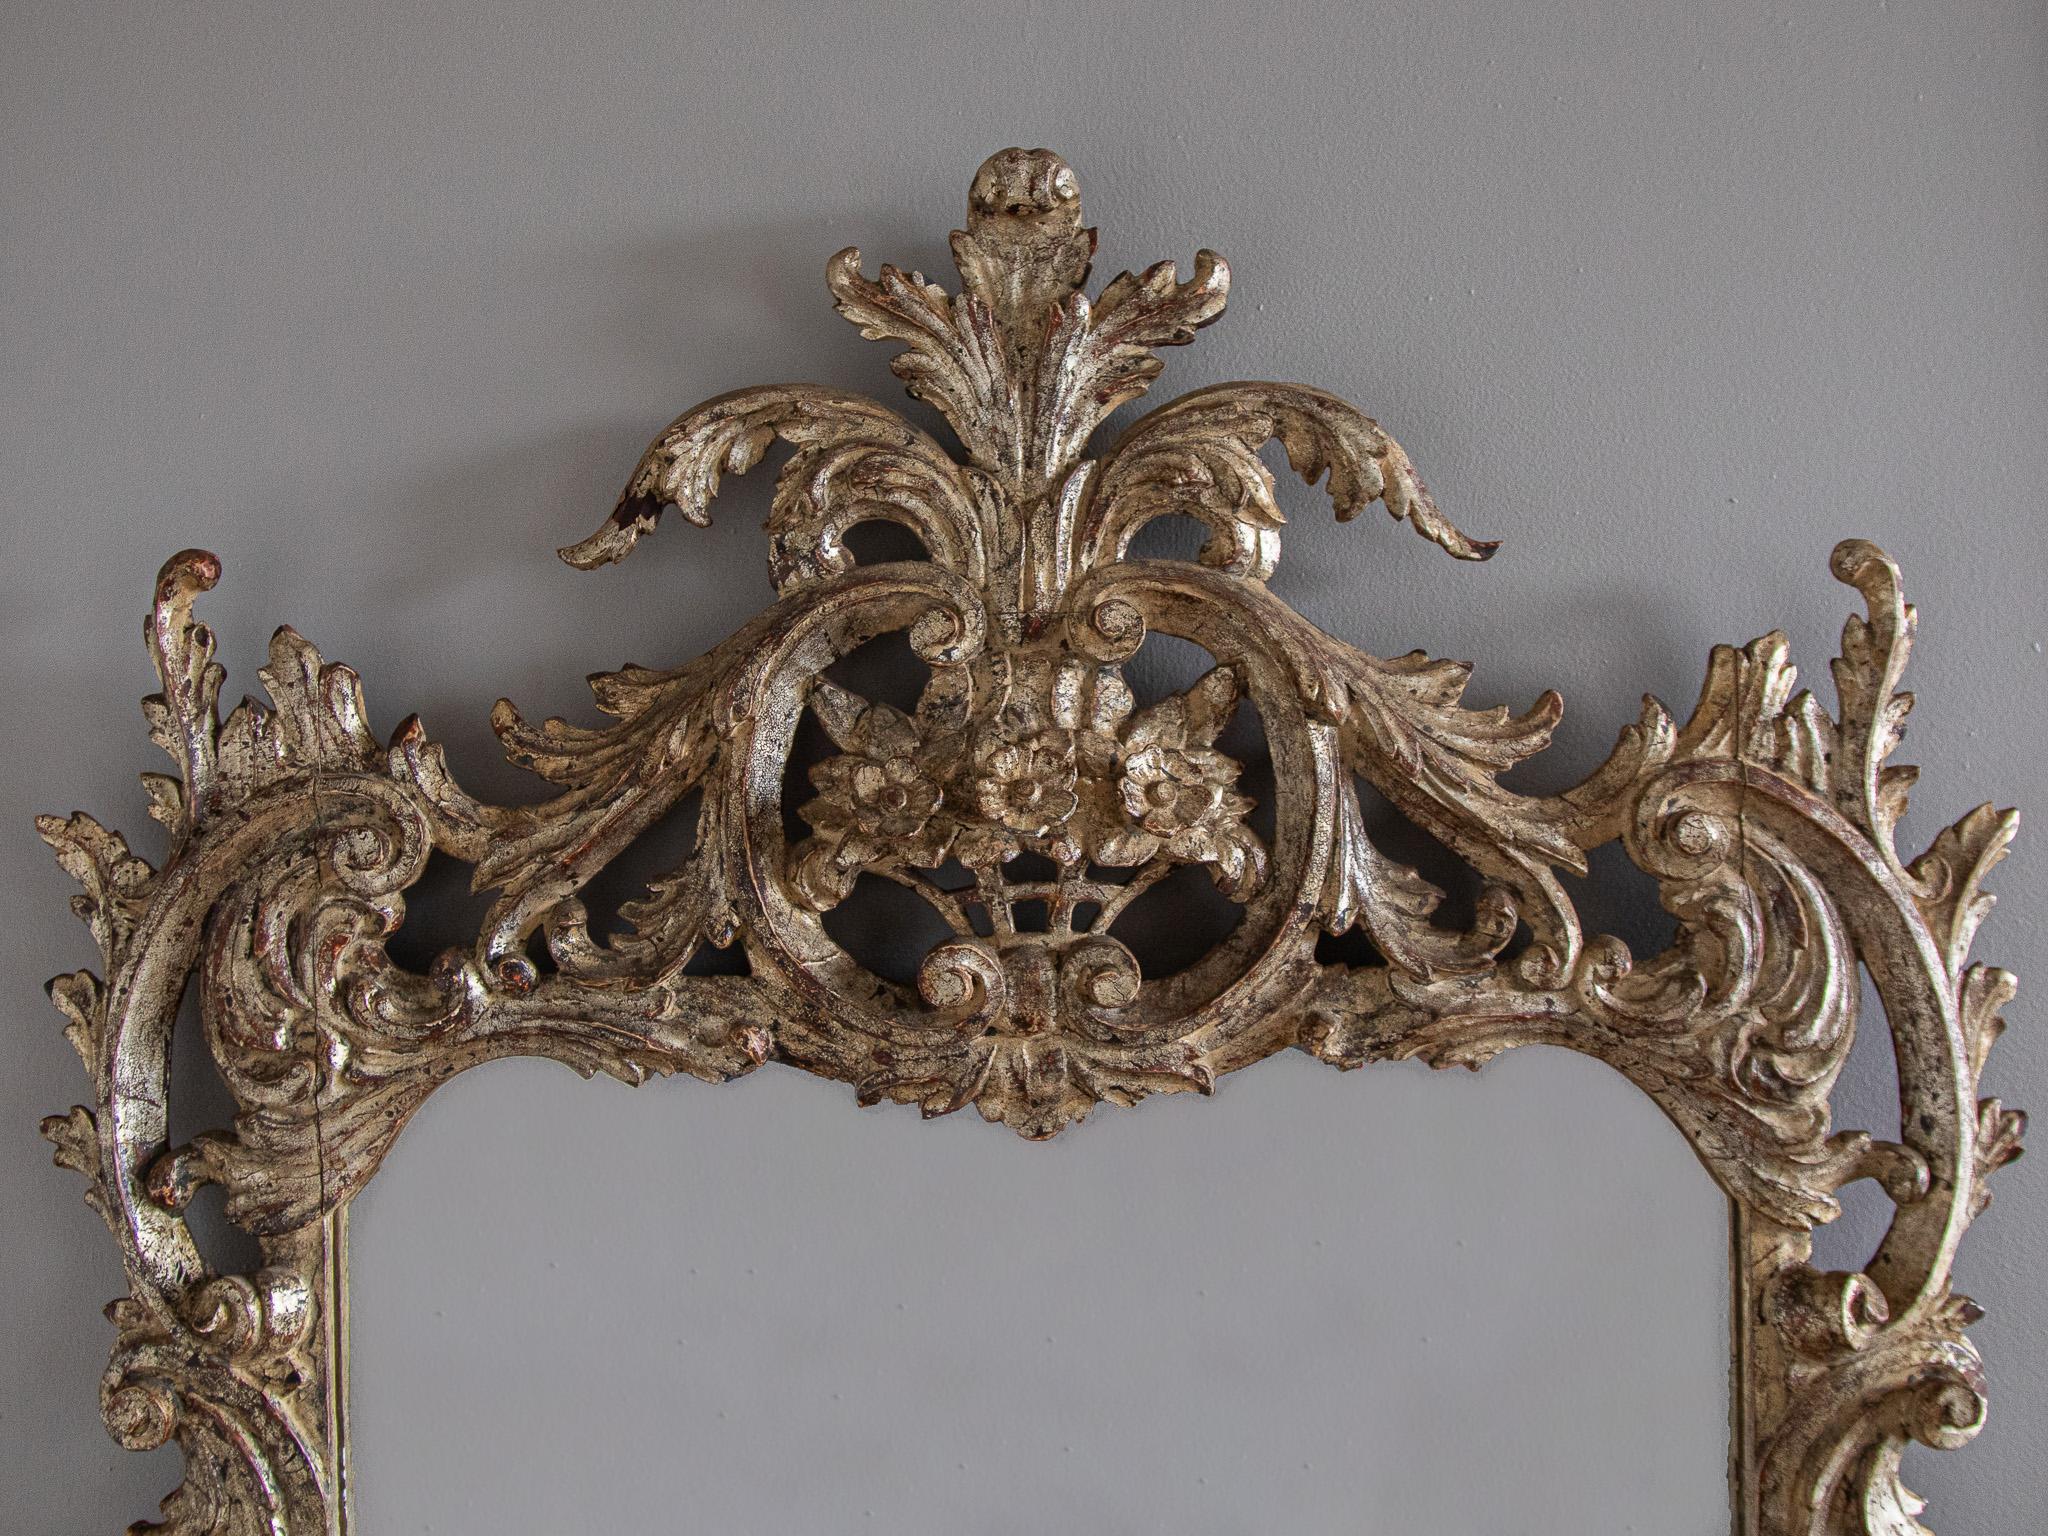 Early 1900’s Florentine rococo Style Silver Giltwood mirror In Good Condition For Sale In London, Park Royal